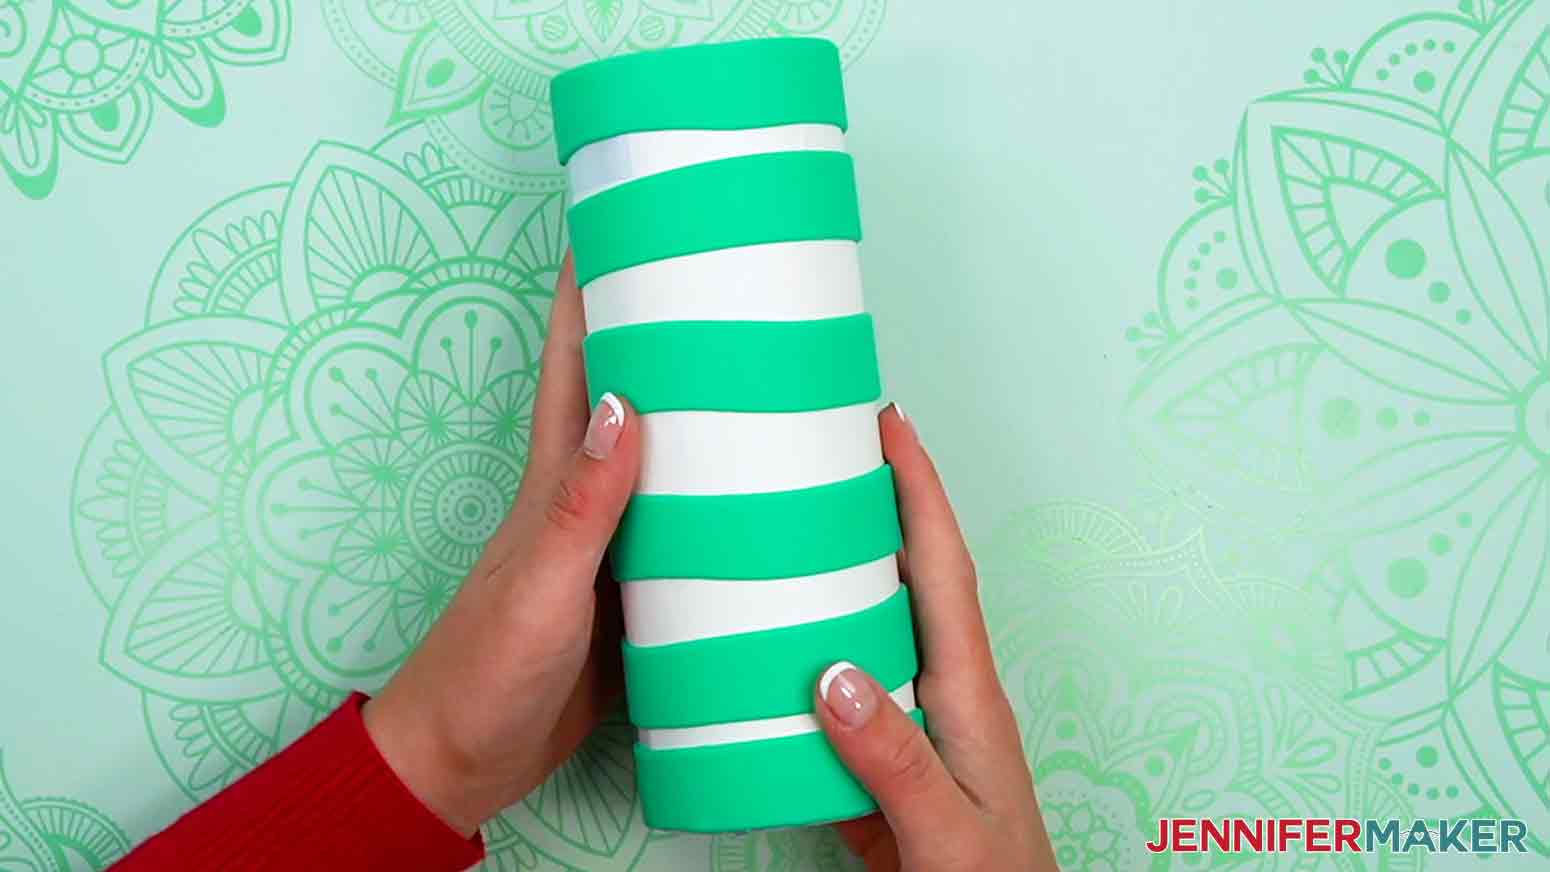 Use multiple bands to hold the wrap in place on the tumbler.